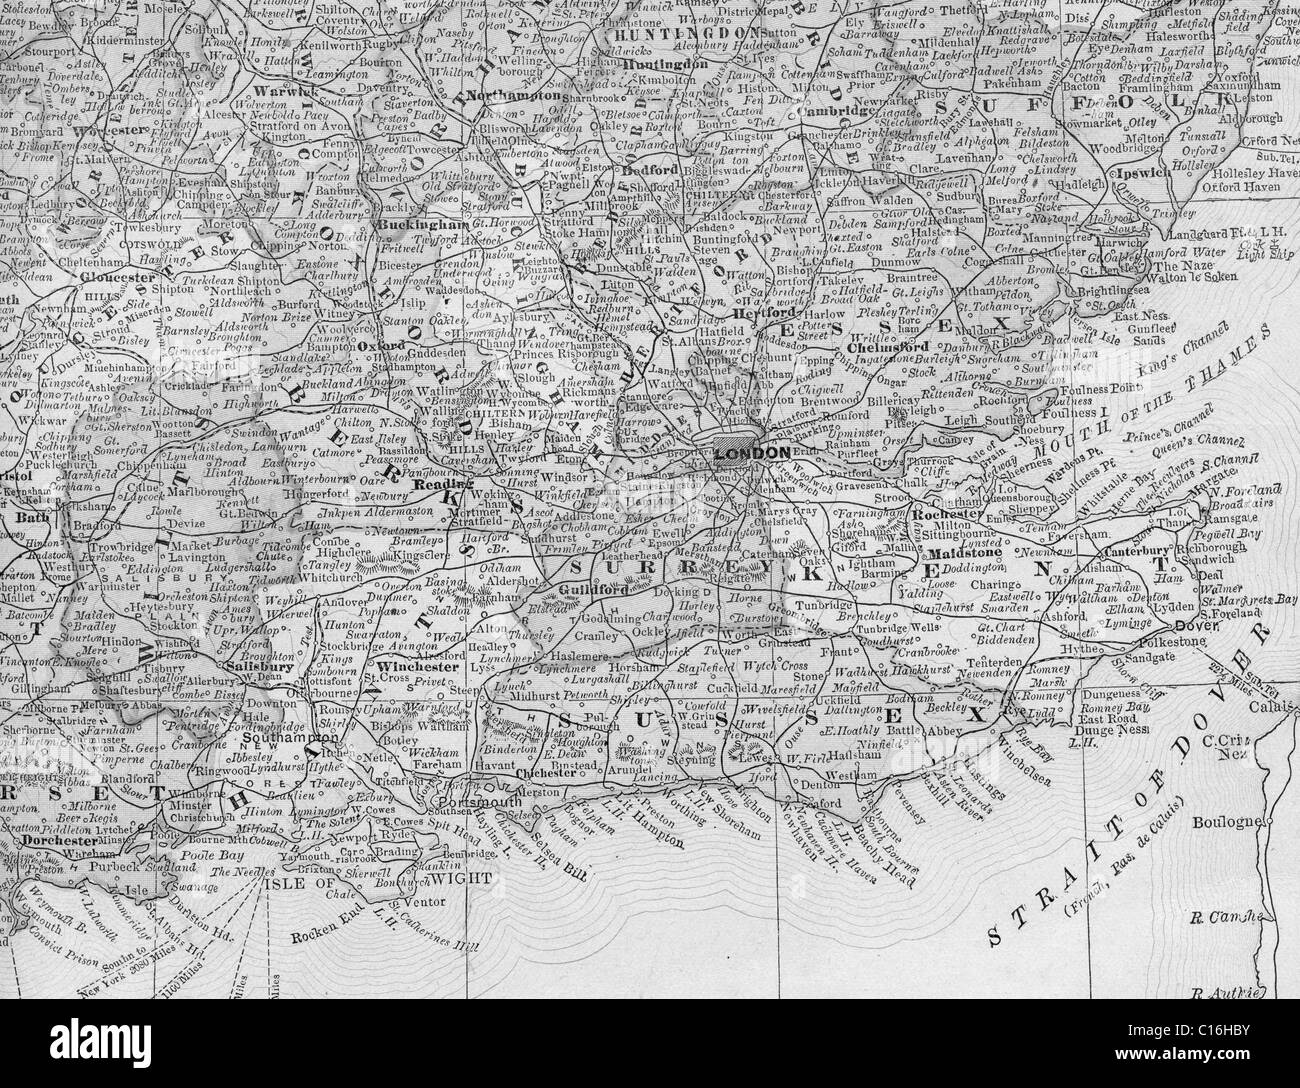 Old map of southeast England from original geography textbook, 1884 Stock Photo